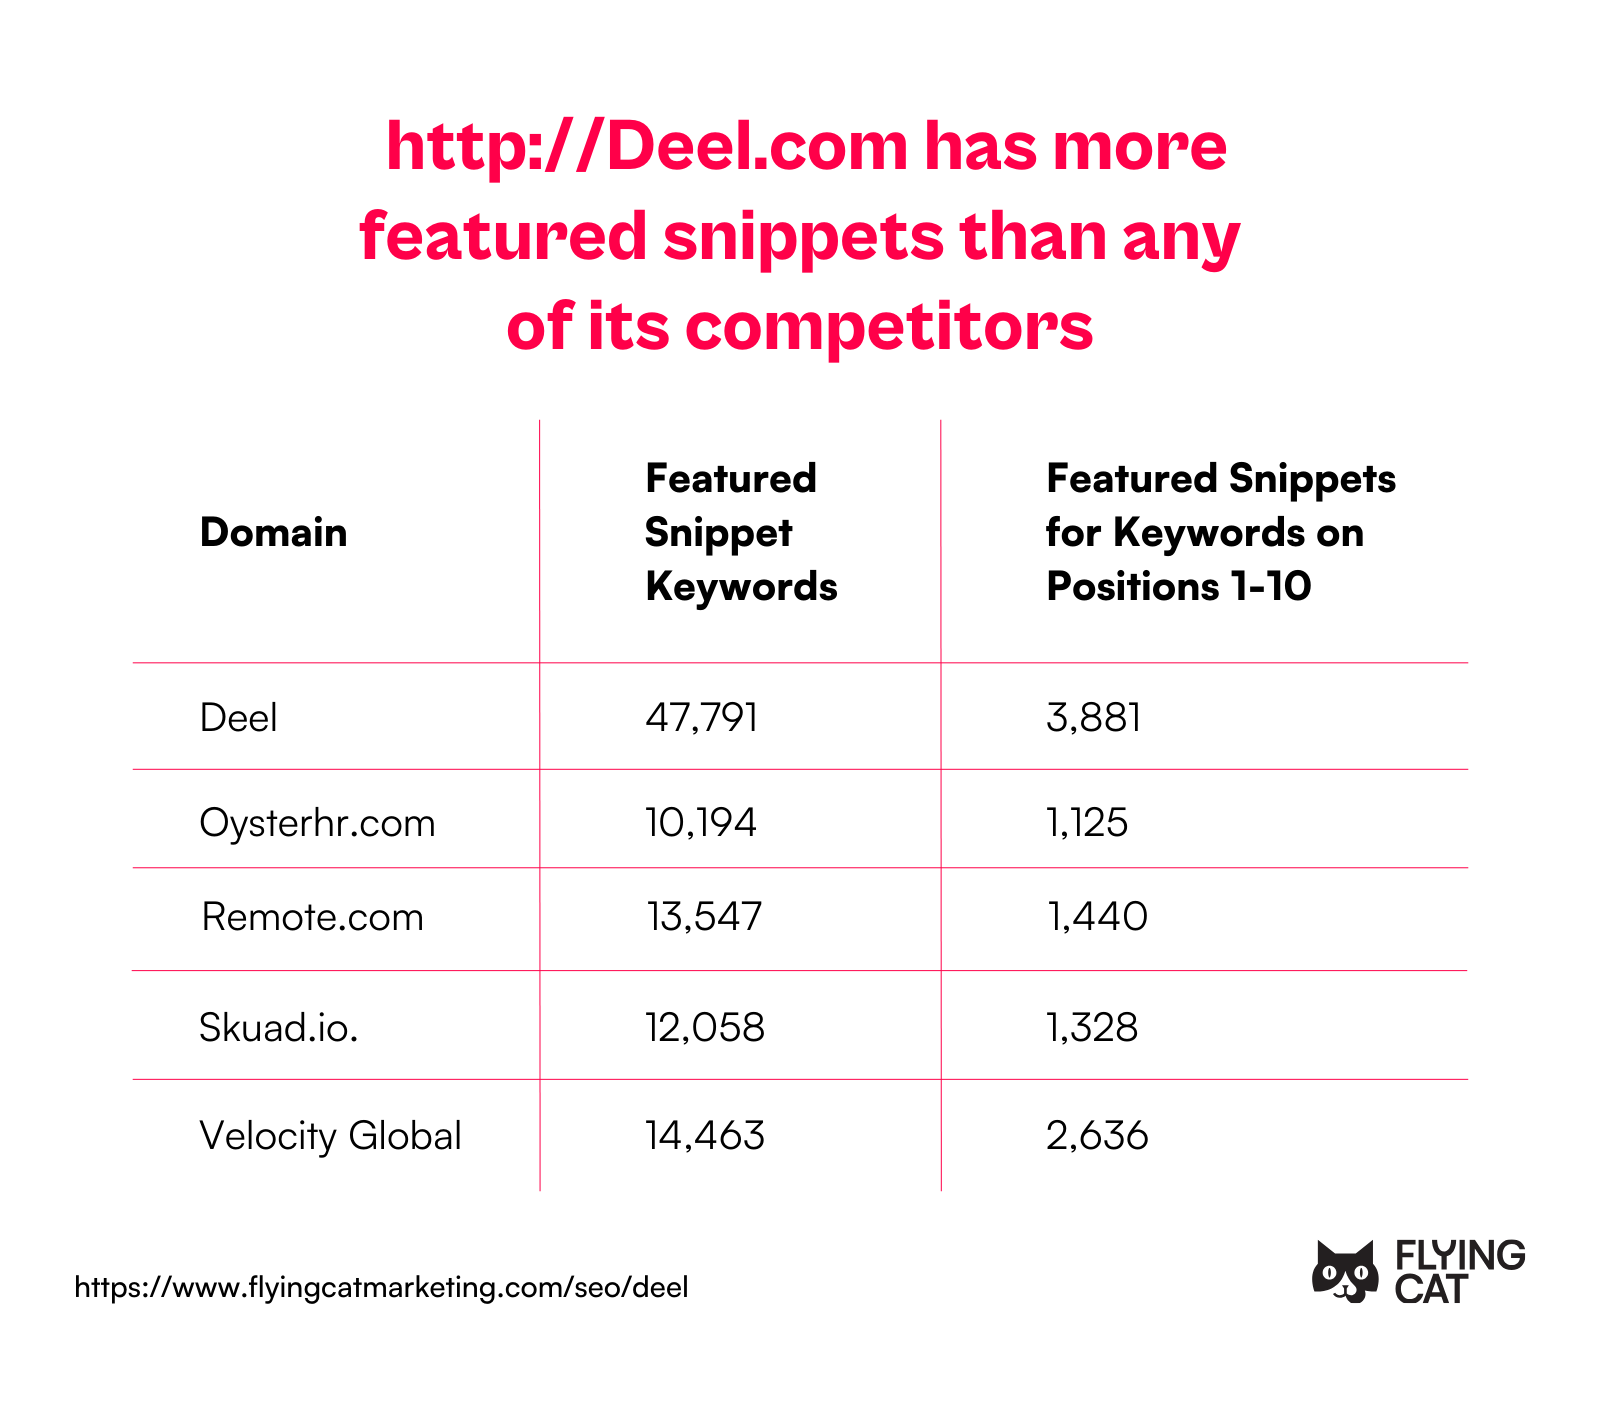 Table showing how Deel has the most featured snippets compared to their competitors